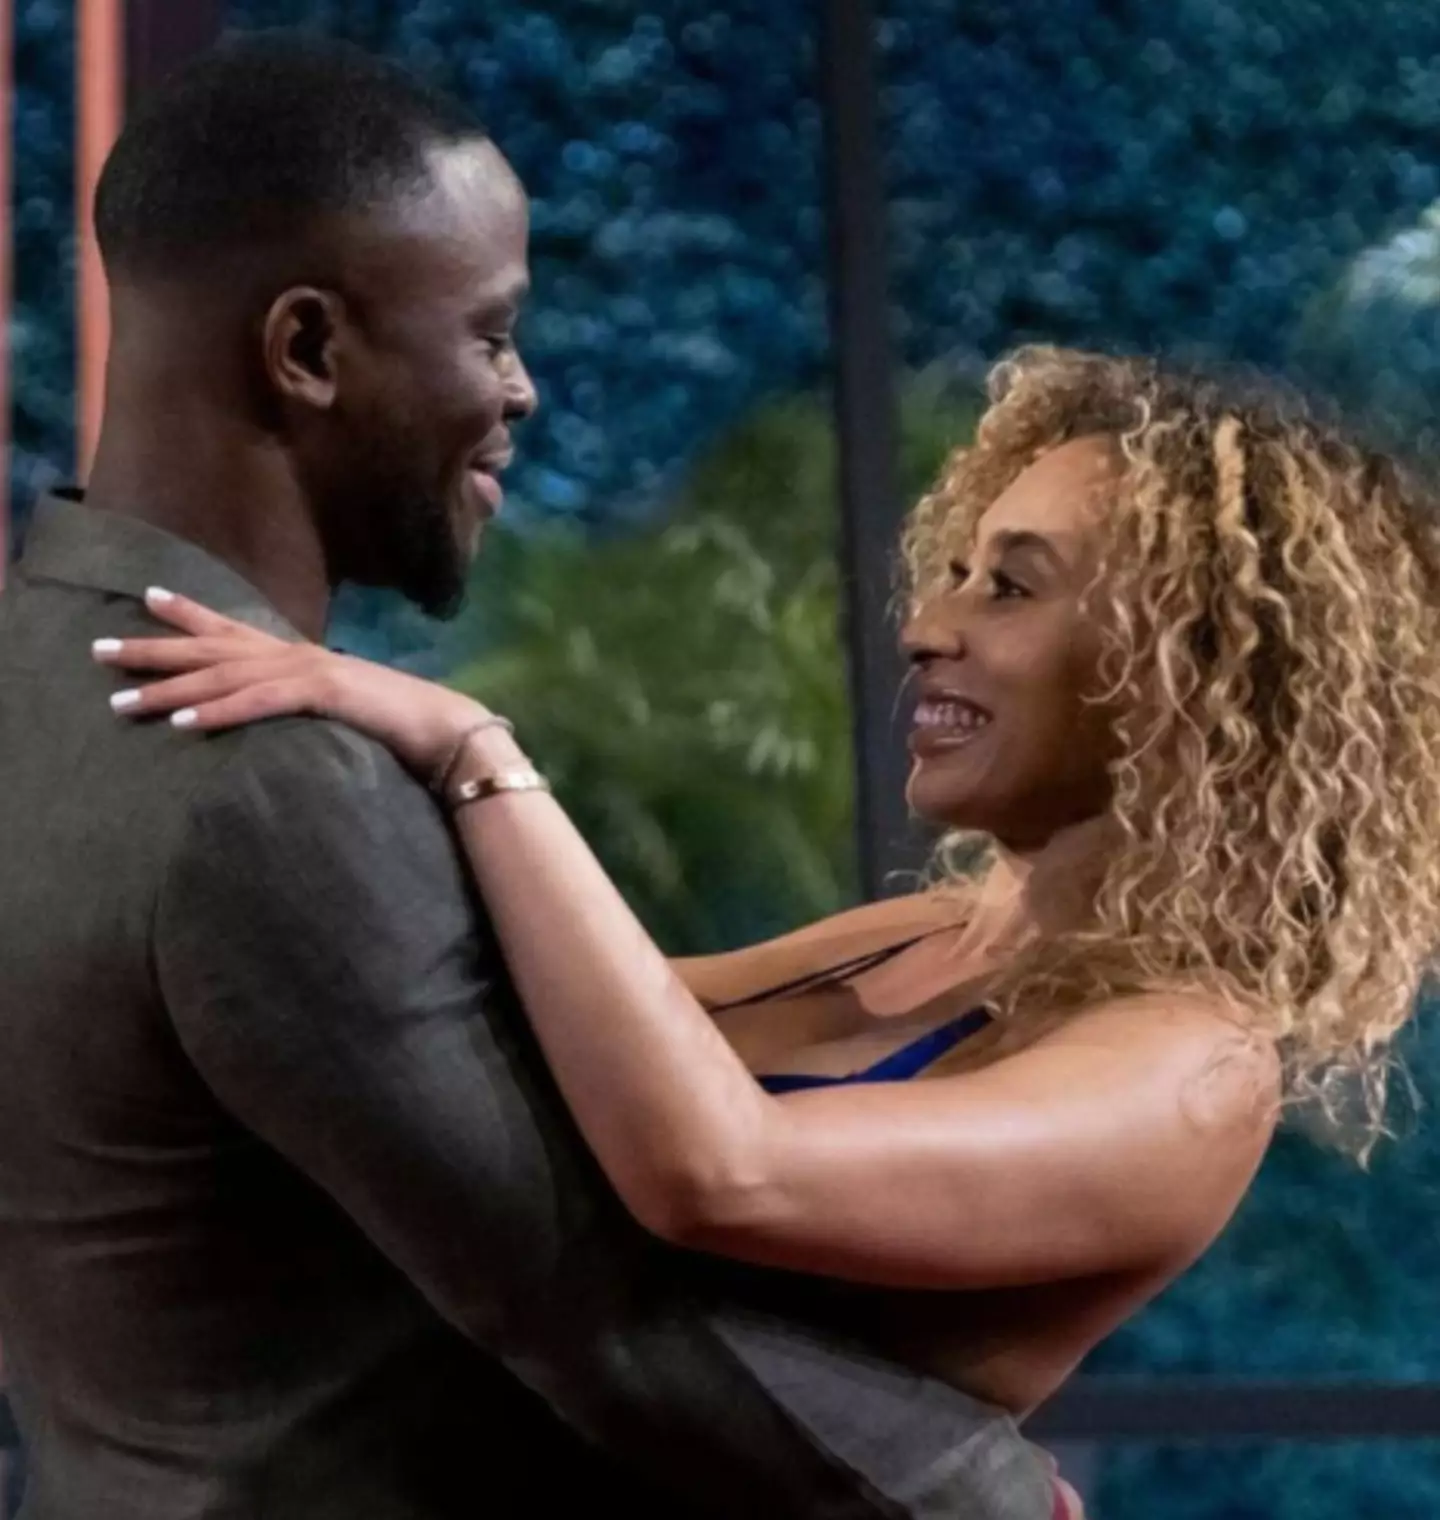 SK Alagbada and Raven Ross met on season 3 of Love Is Blind but are sadly no longer together.